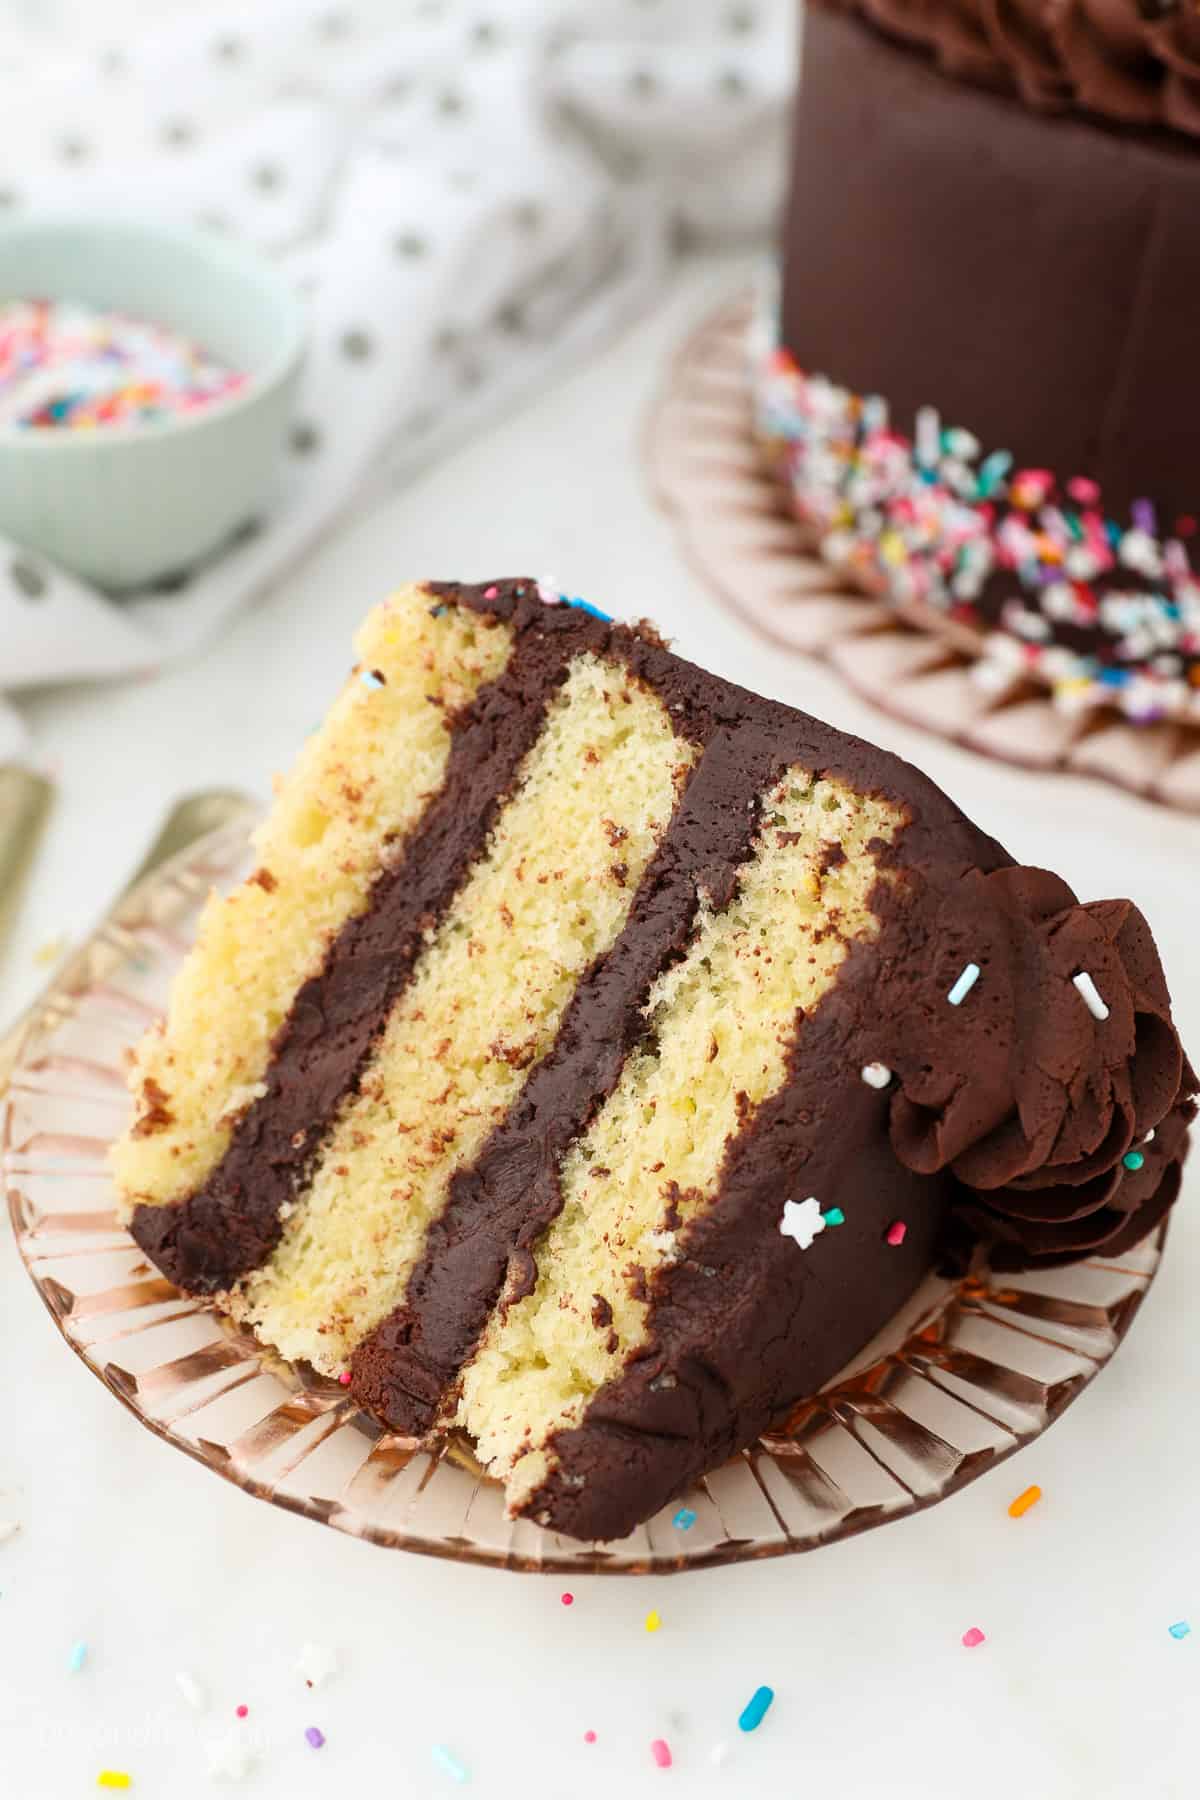 A slice of yellow layer cake with chocolate frosting on a plate, next to the rest of the cake in the background.